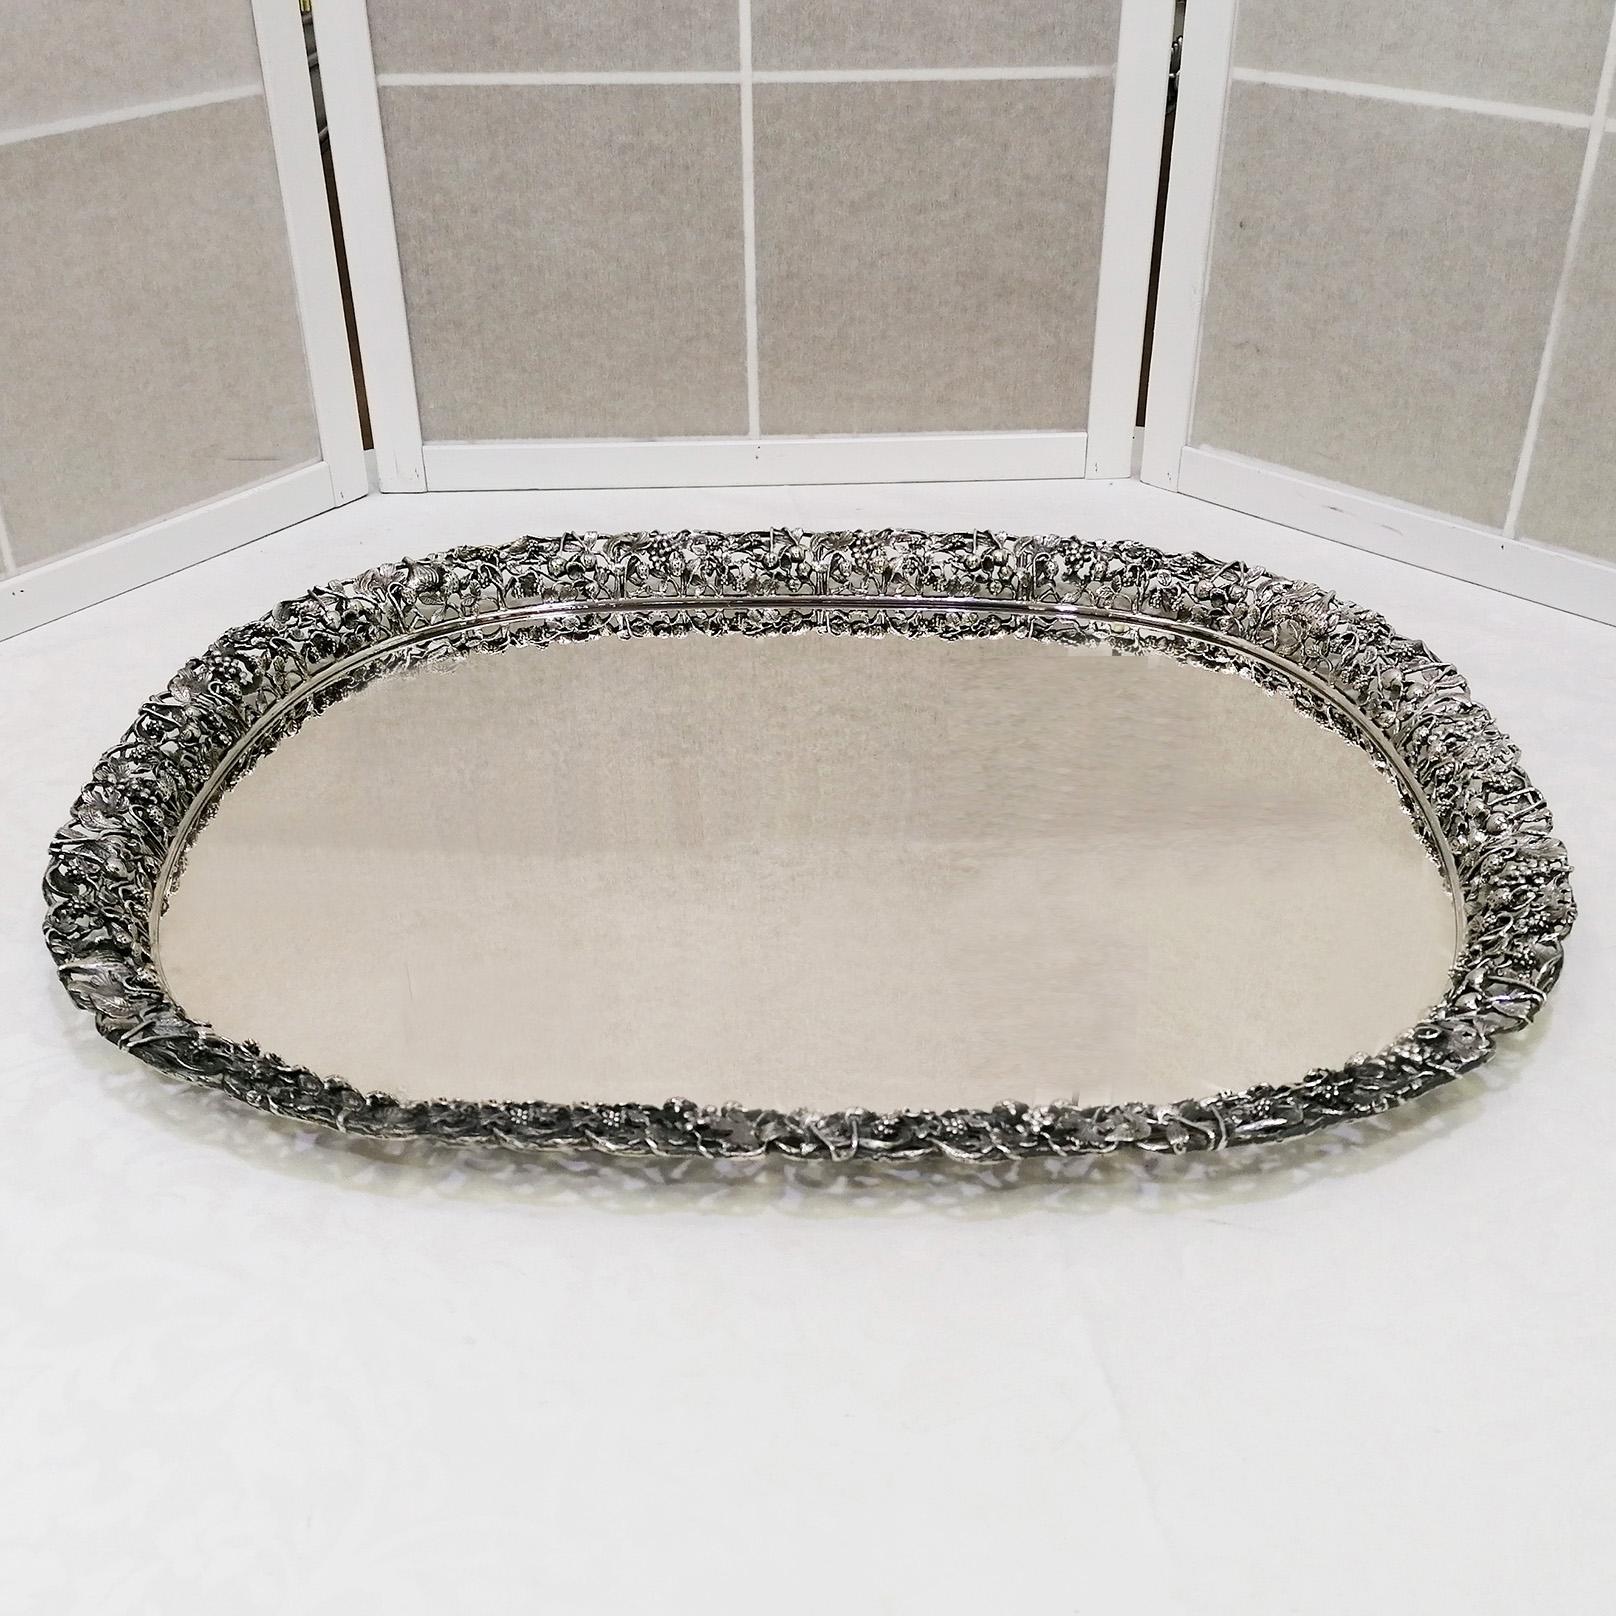 Handmade 800 solid silver tray.
This large tray has a pumice stone polished bottom.
The edge was made with the sector fusion technique and subsequently welded one by one and applied to the bottom of the tray.
The important edge reproduces many types